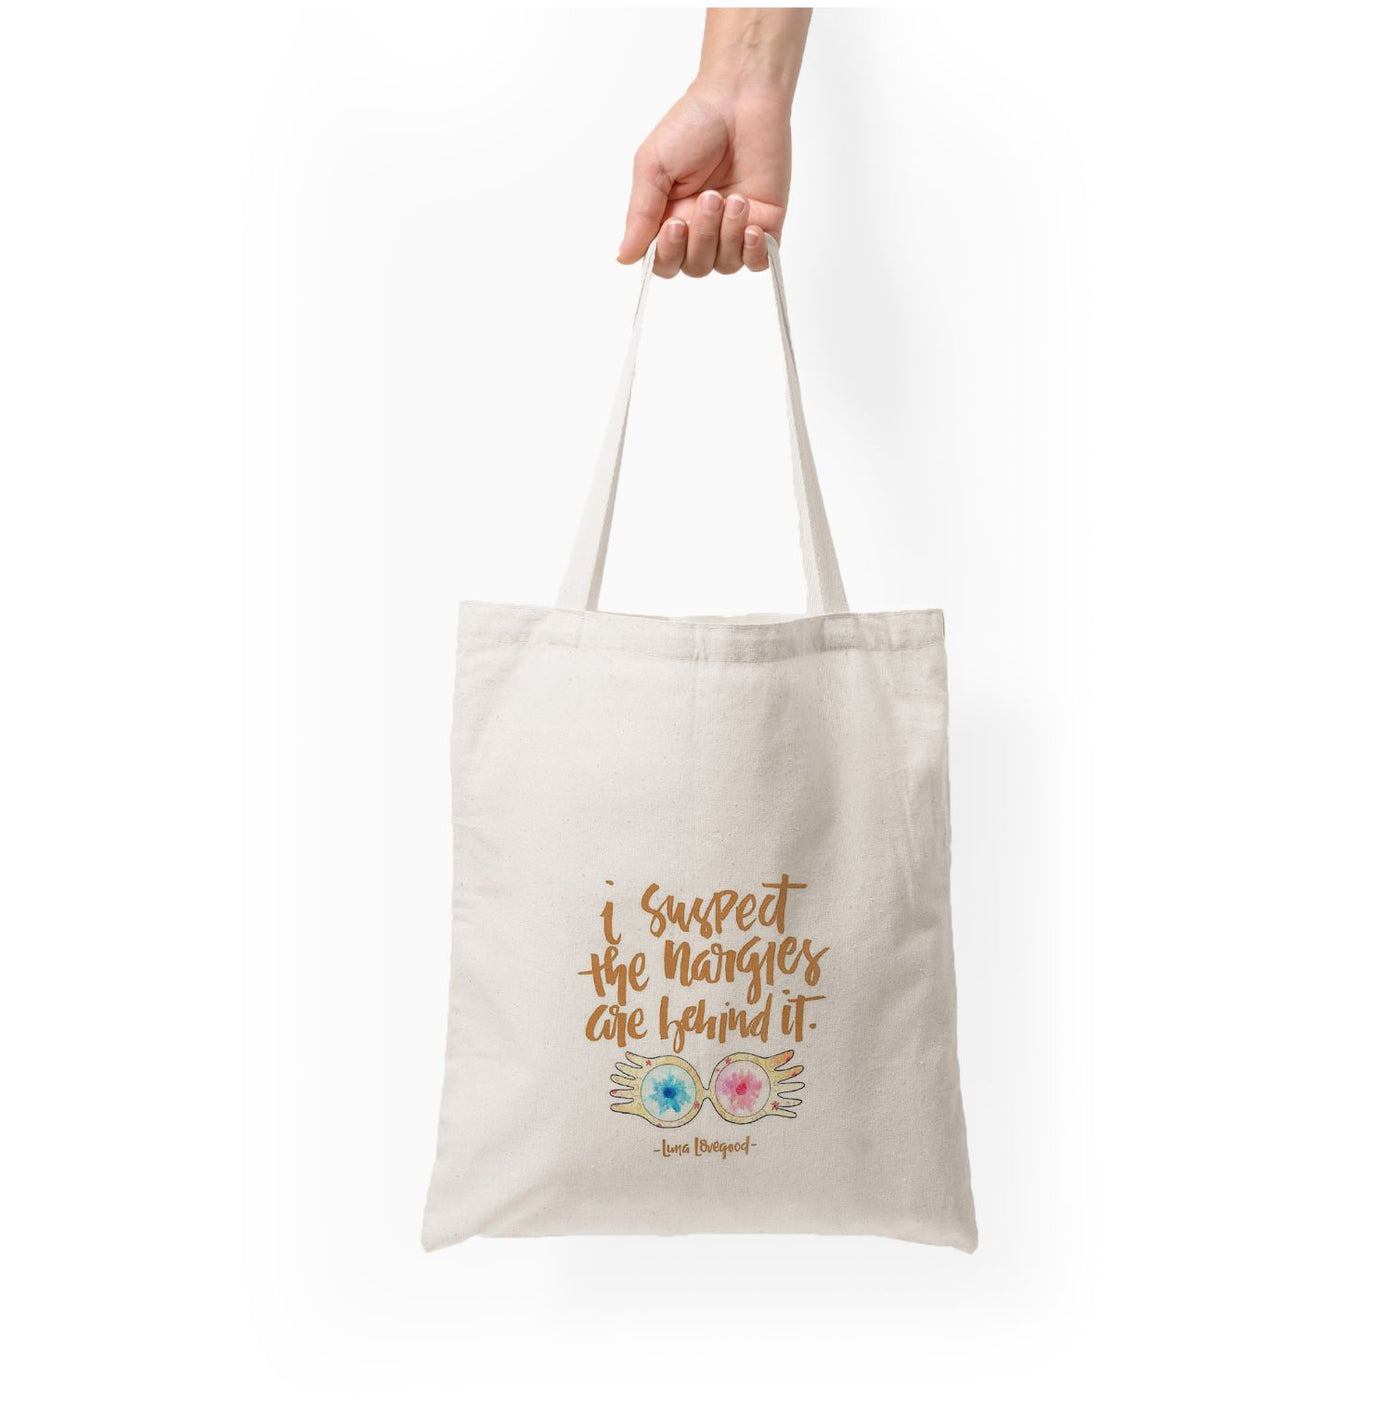 I Suspect The Nargles Are Behind It - Harry Potter Tote Bag